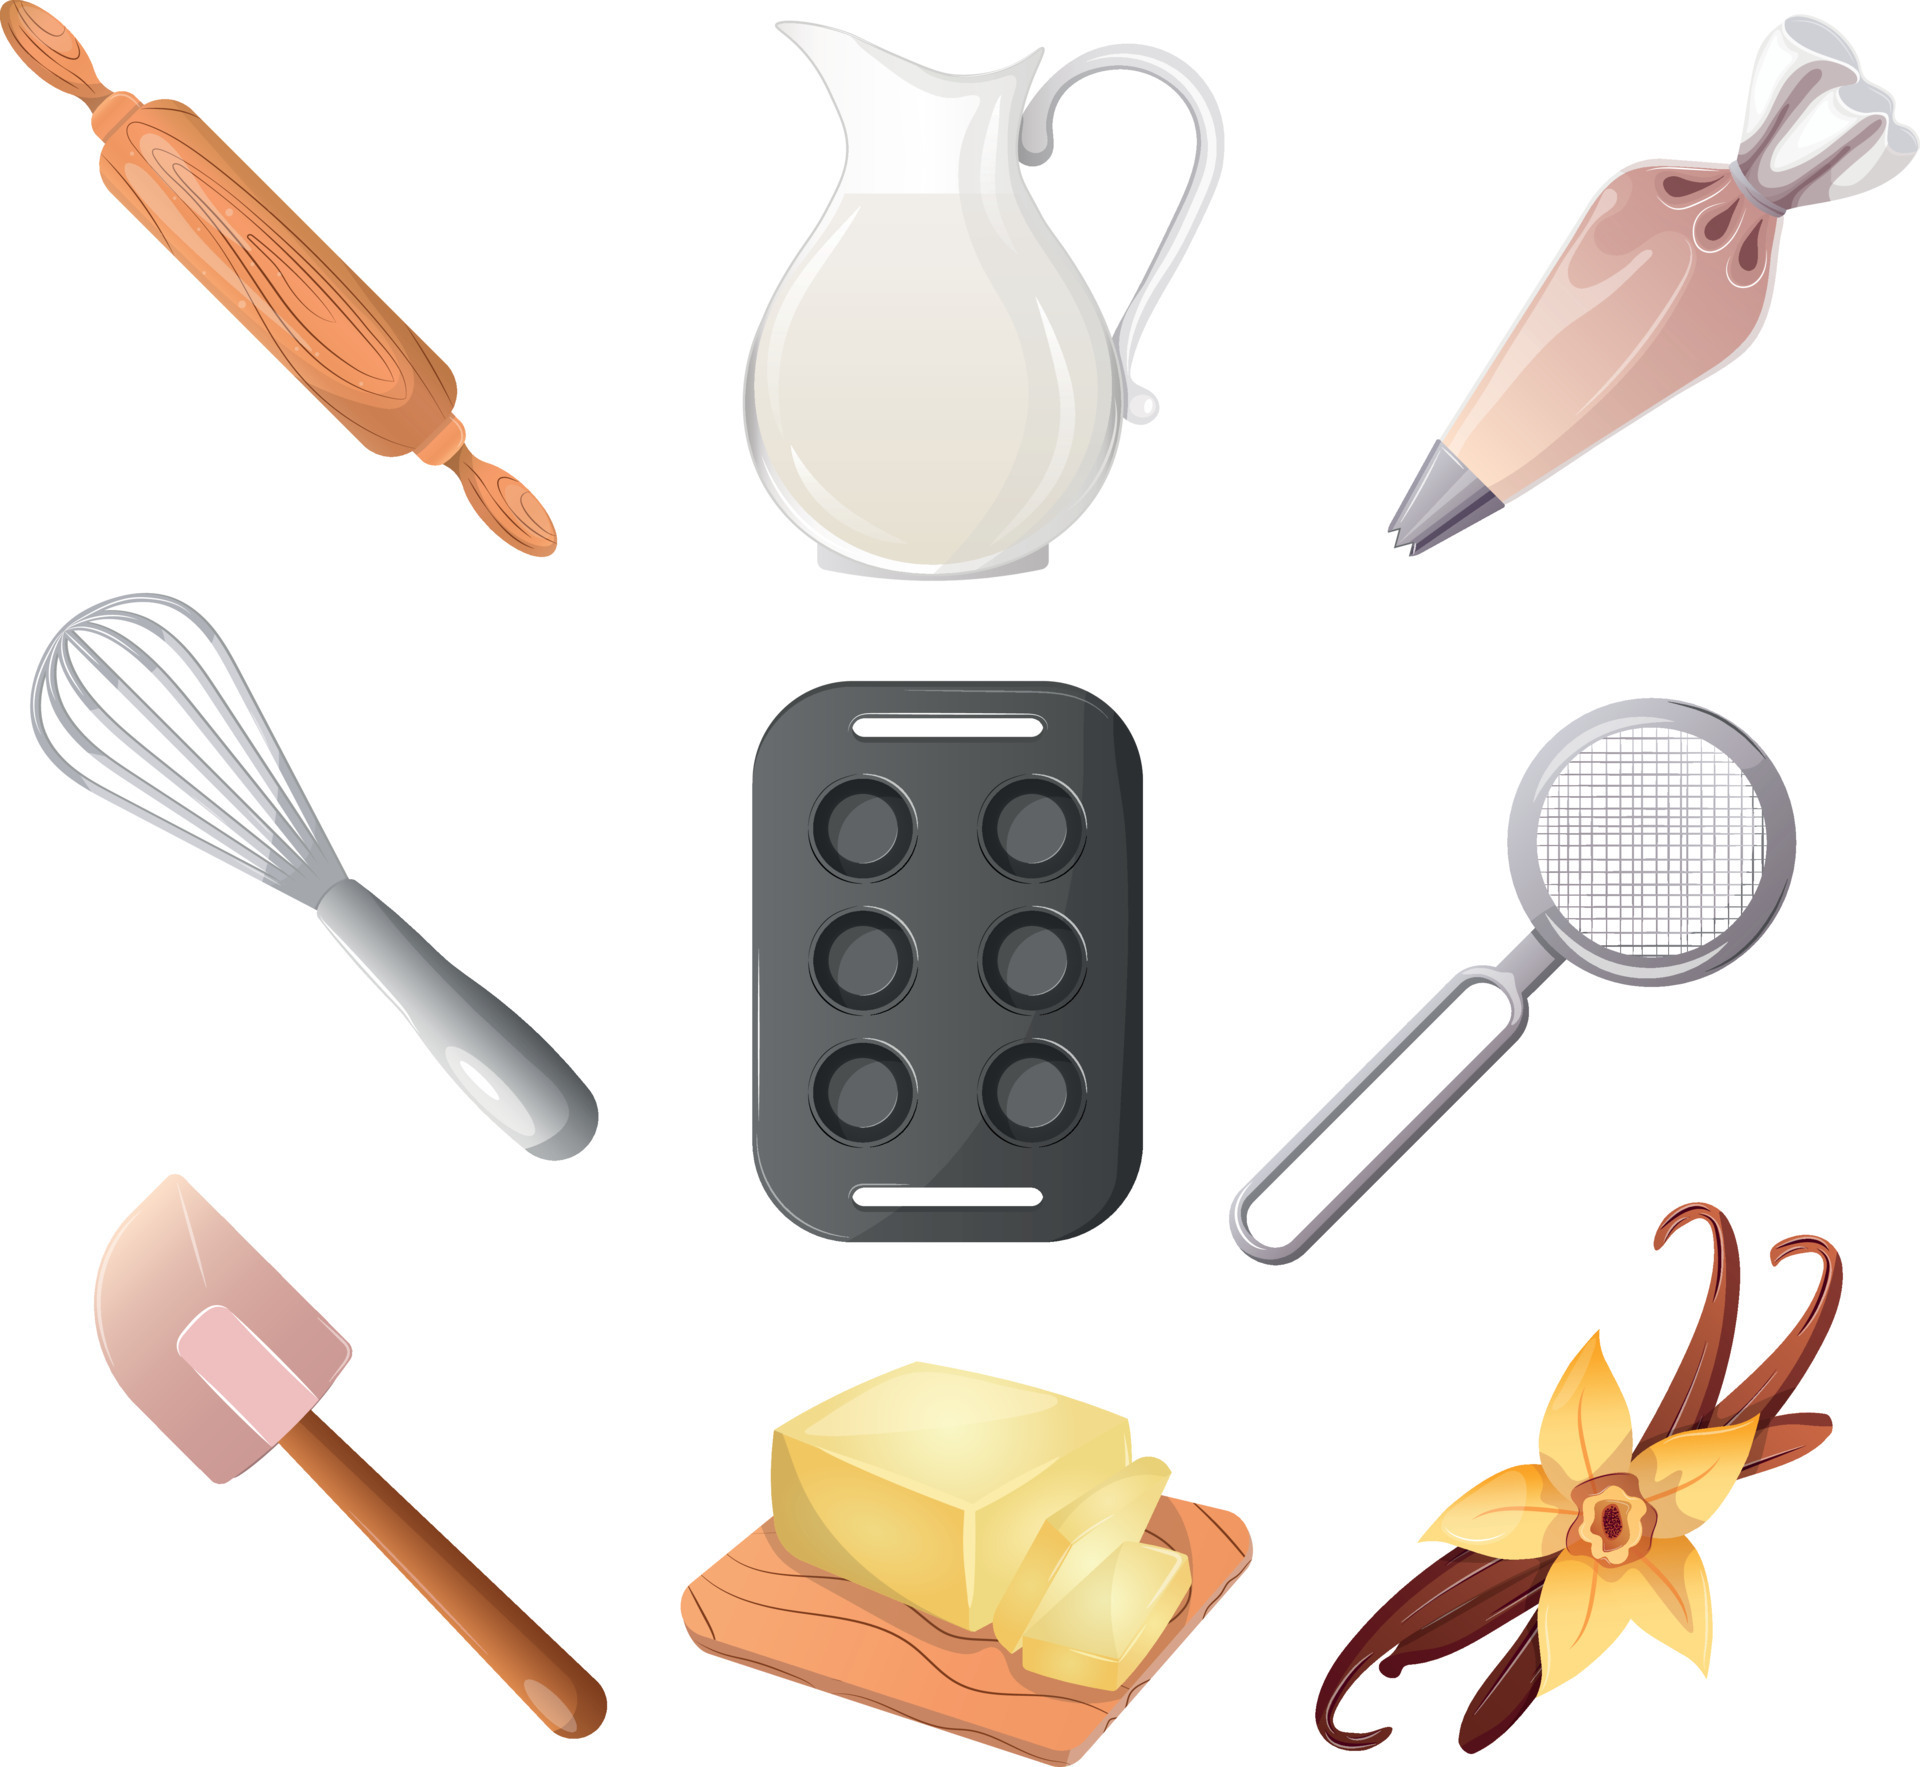 https://static.vecteezy.com/system/resources/previews/016/219/182/original/set-of-baking-tools-kitchenware-cooking-baking-utensil-desserts-pastry-dishes-ingredients-for-baking-items-whisk-spatulas-steiner-vanilla-pastry-bag-measuring-spoons-illustration-free-vector.jpg